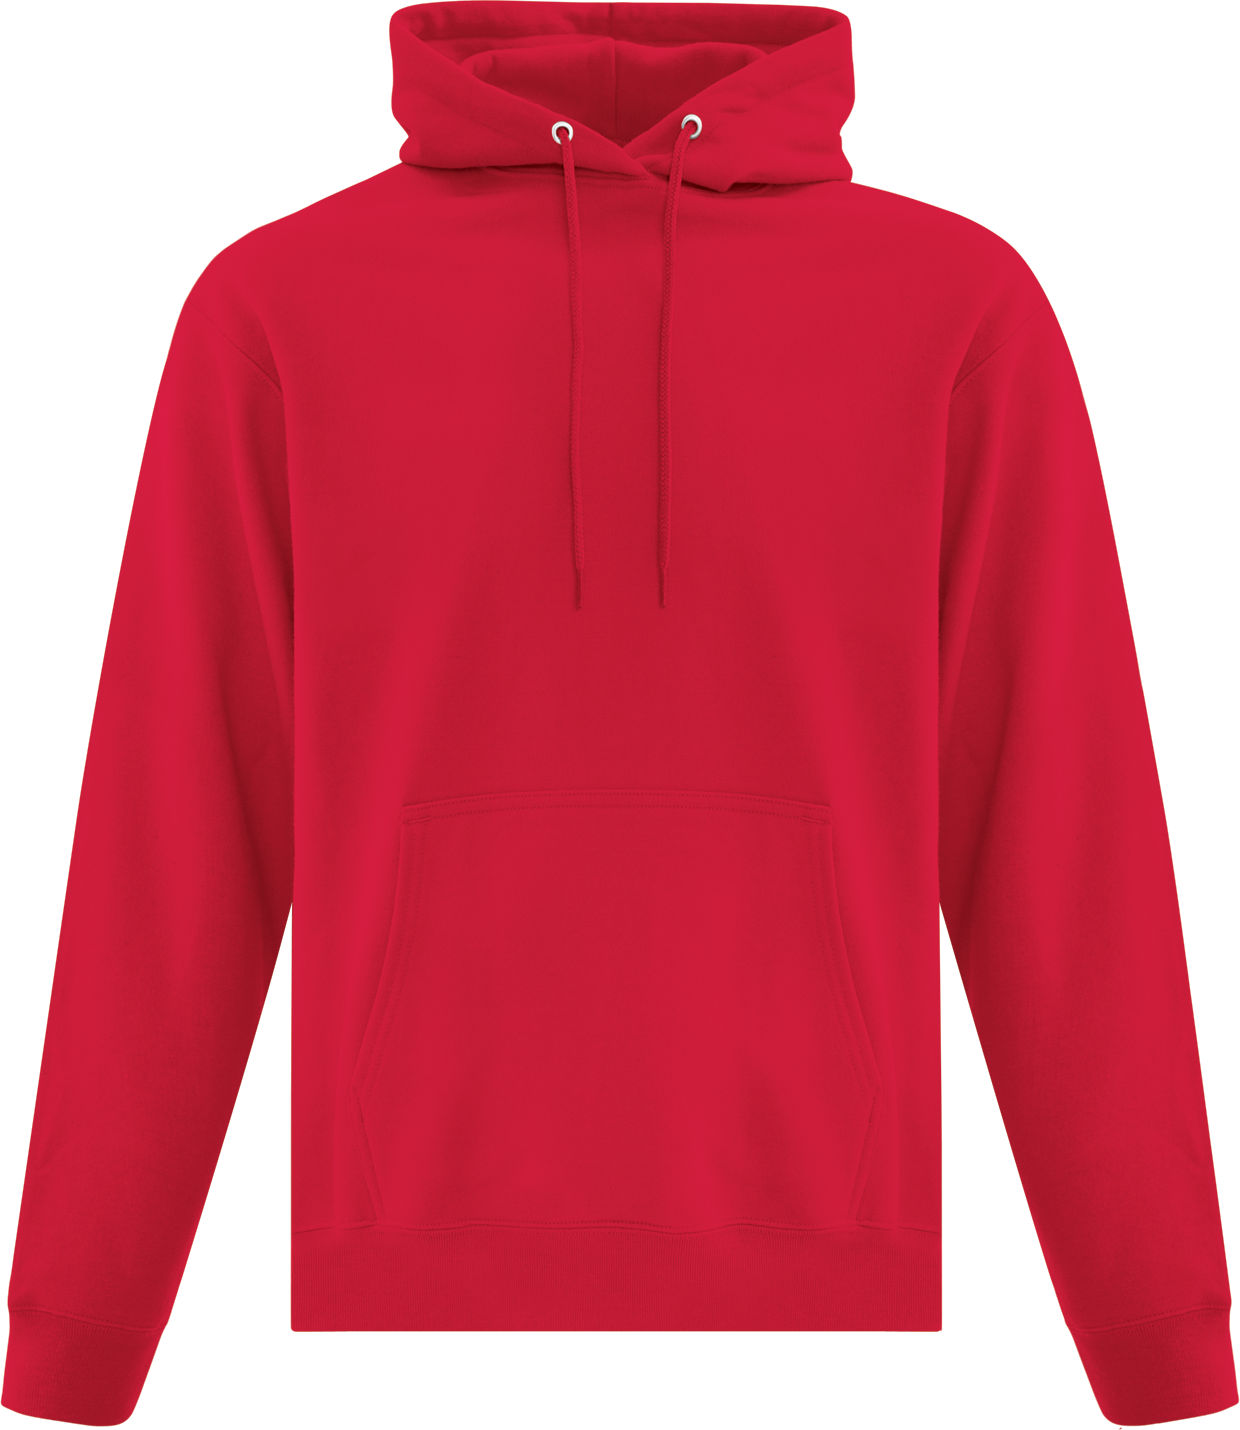 basic red pullover hoodie